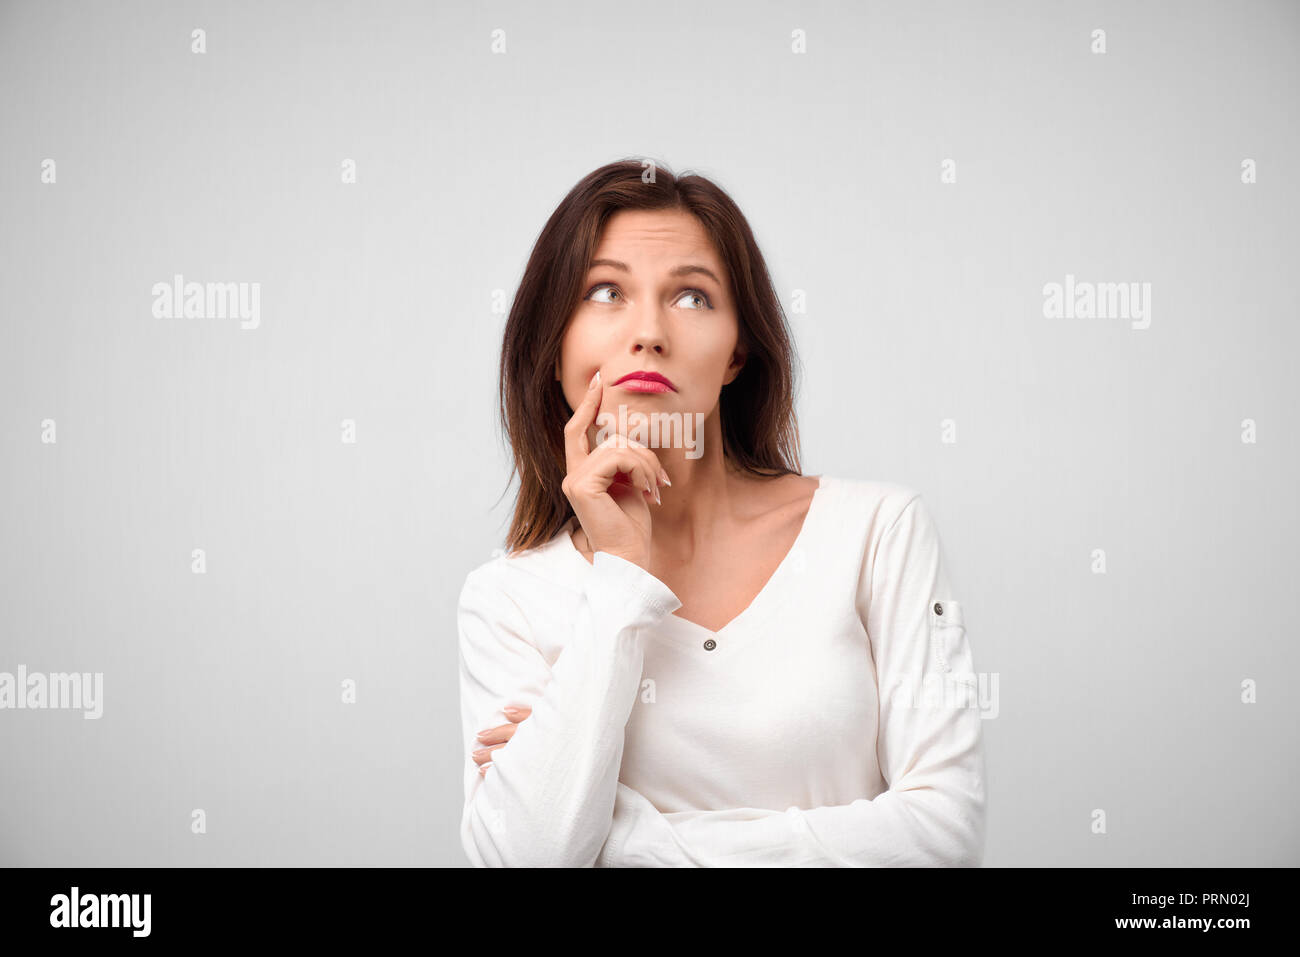 Isolated portrait of stylish young caucasian woman with dark hair touching her chin and looking up with doubtful and sceptical expression, suspecting  Stock Photo